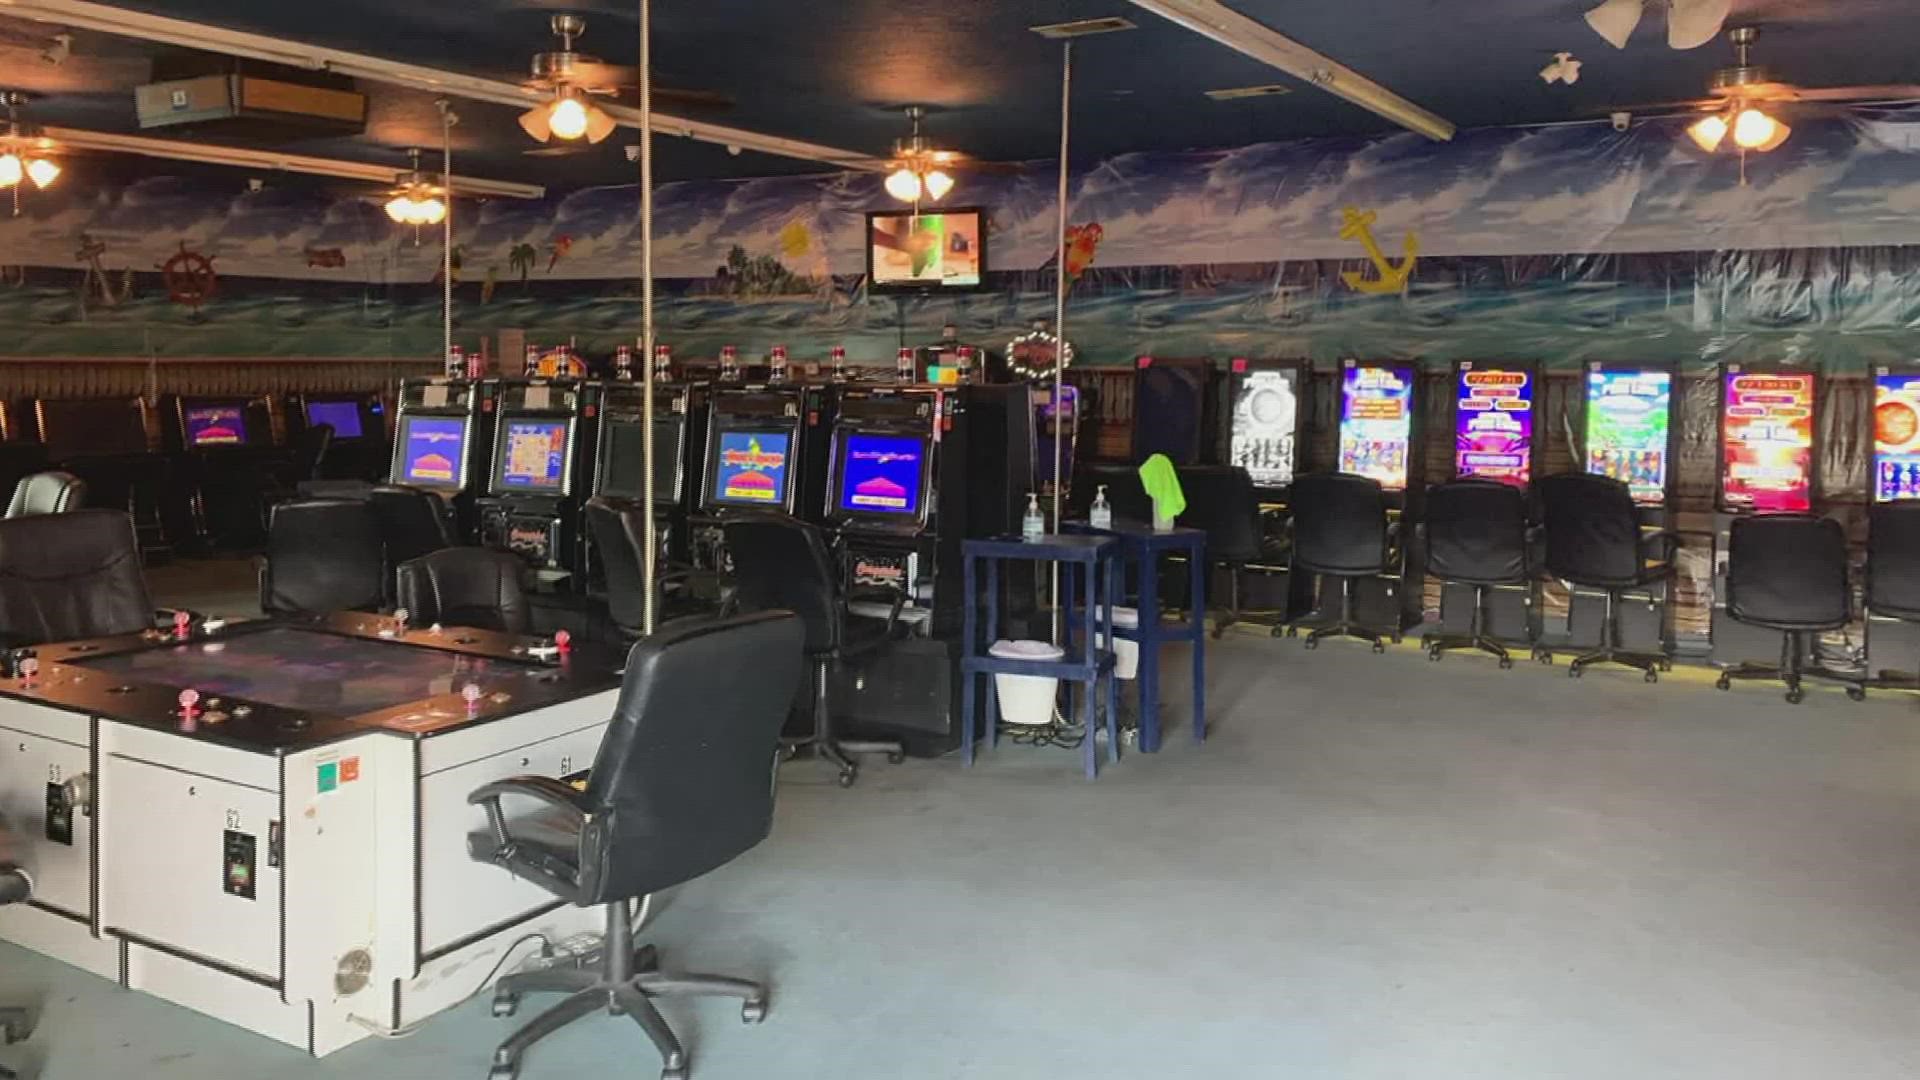 Violations were found at The Getaway Game Room in Vidor and the Fuel Mart Game Room in Rose City.